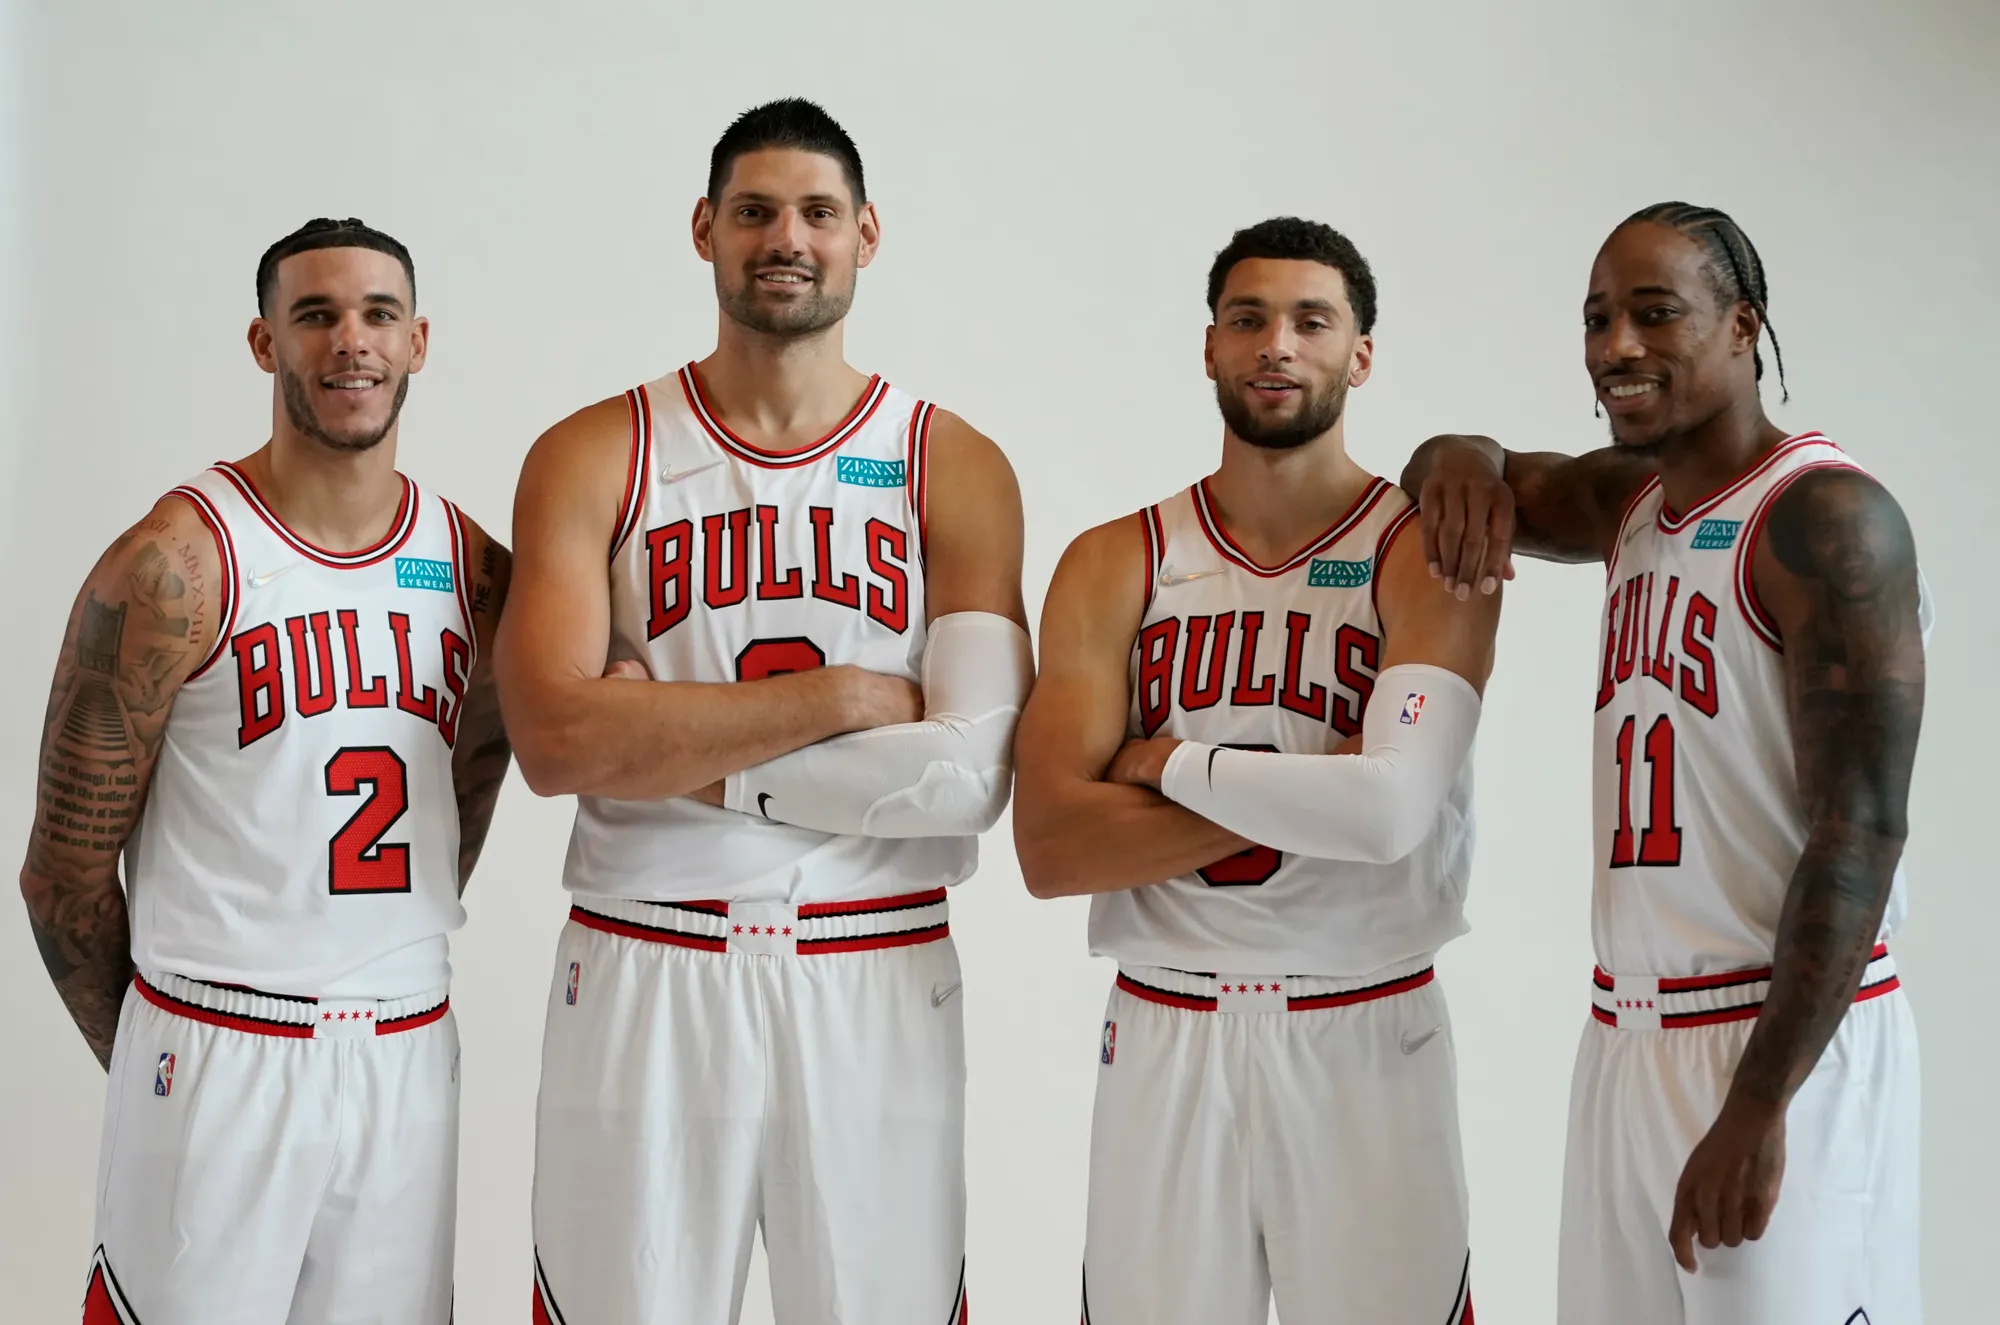 Bulls see pieces to make playoffs after busy offseason